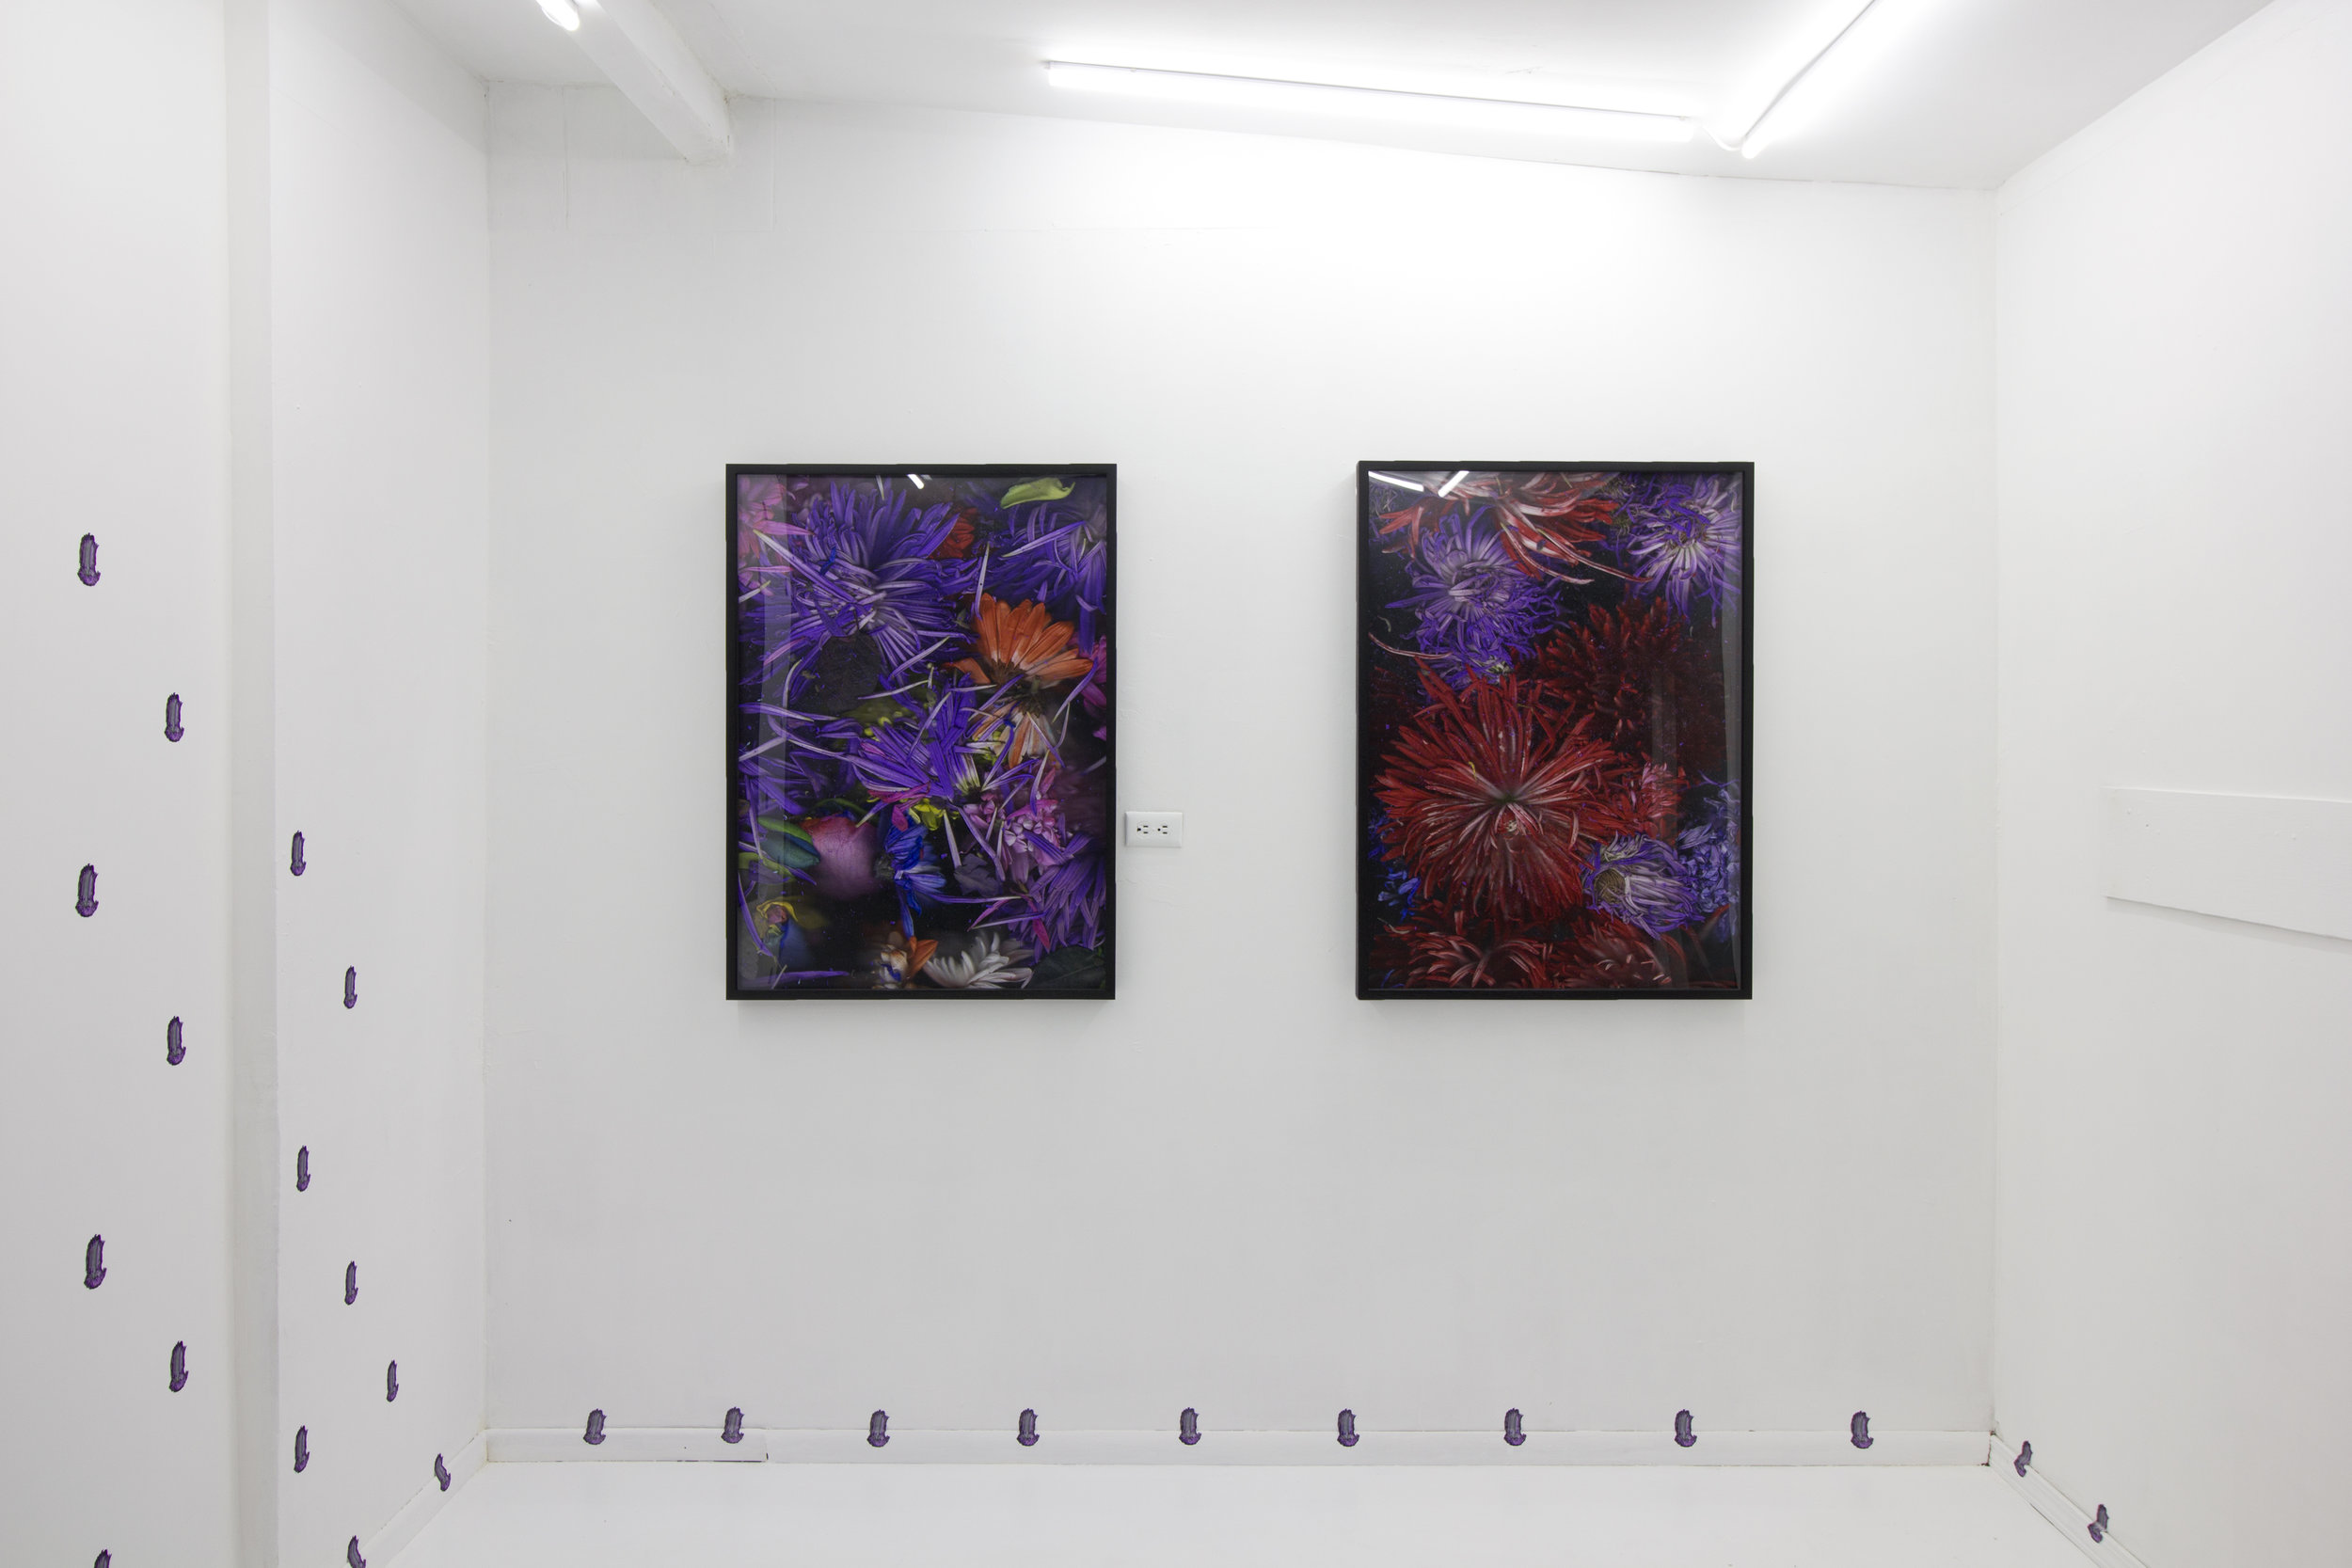  Quick and Endless, 2018, Silver halide archival print, artist frames, wall vinyl  Installation view: "Quick and Endless" at off-site  Ochi Projects , Los Angeles CA 